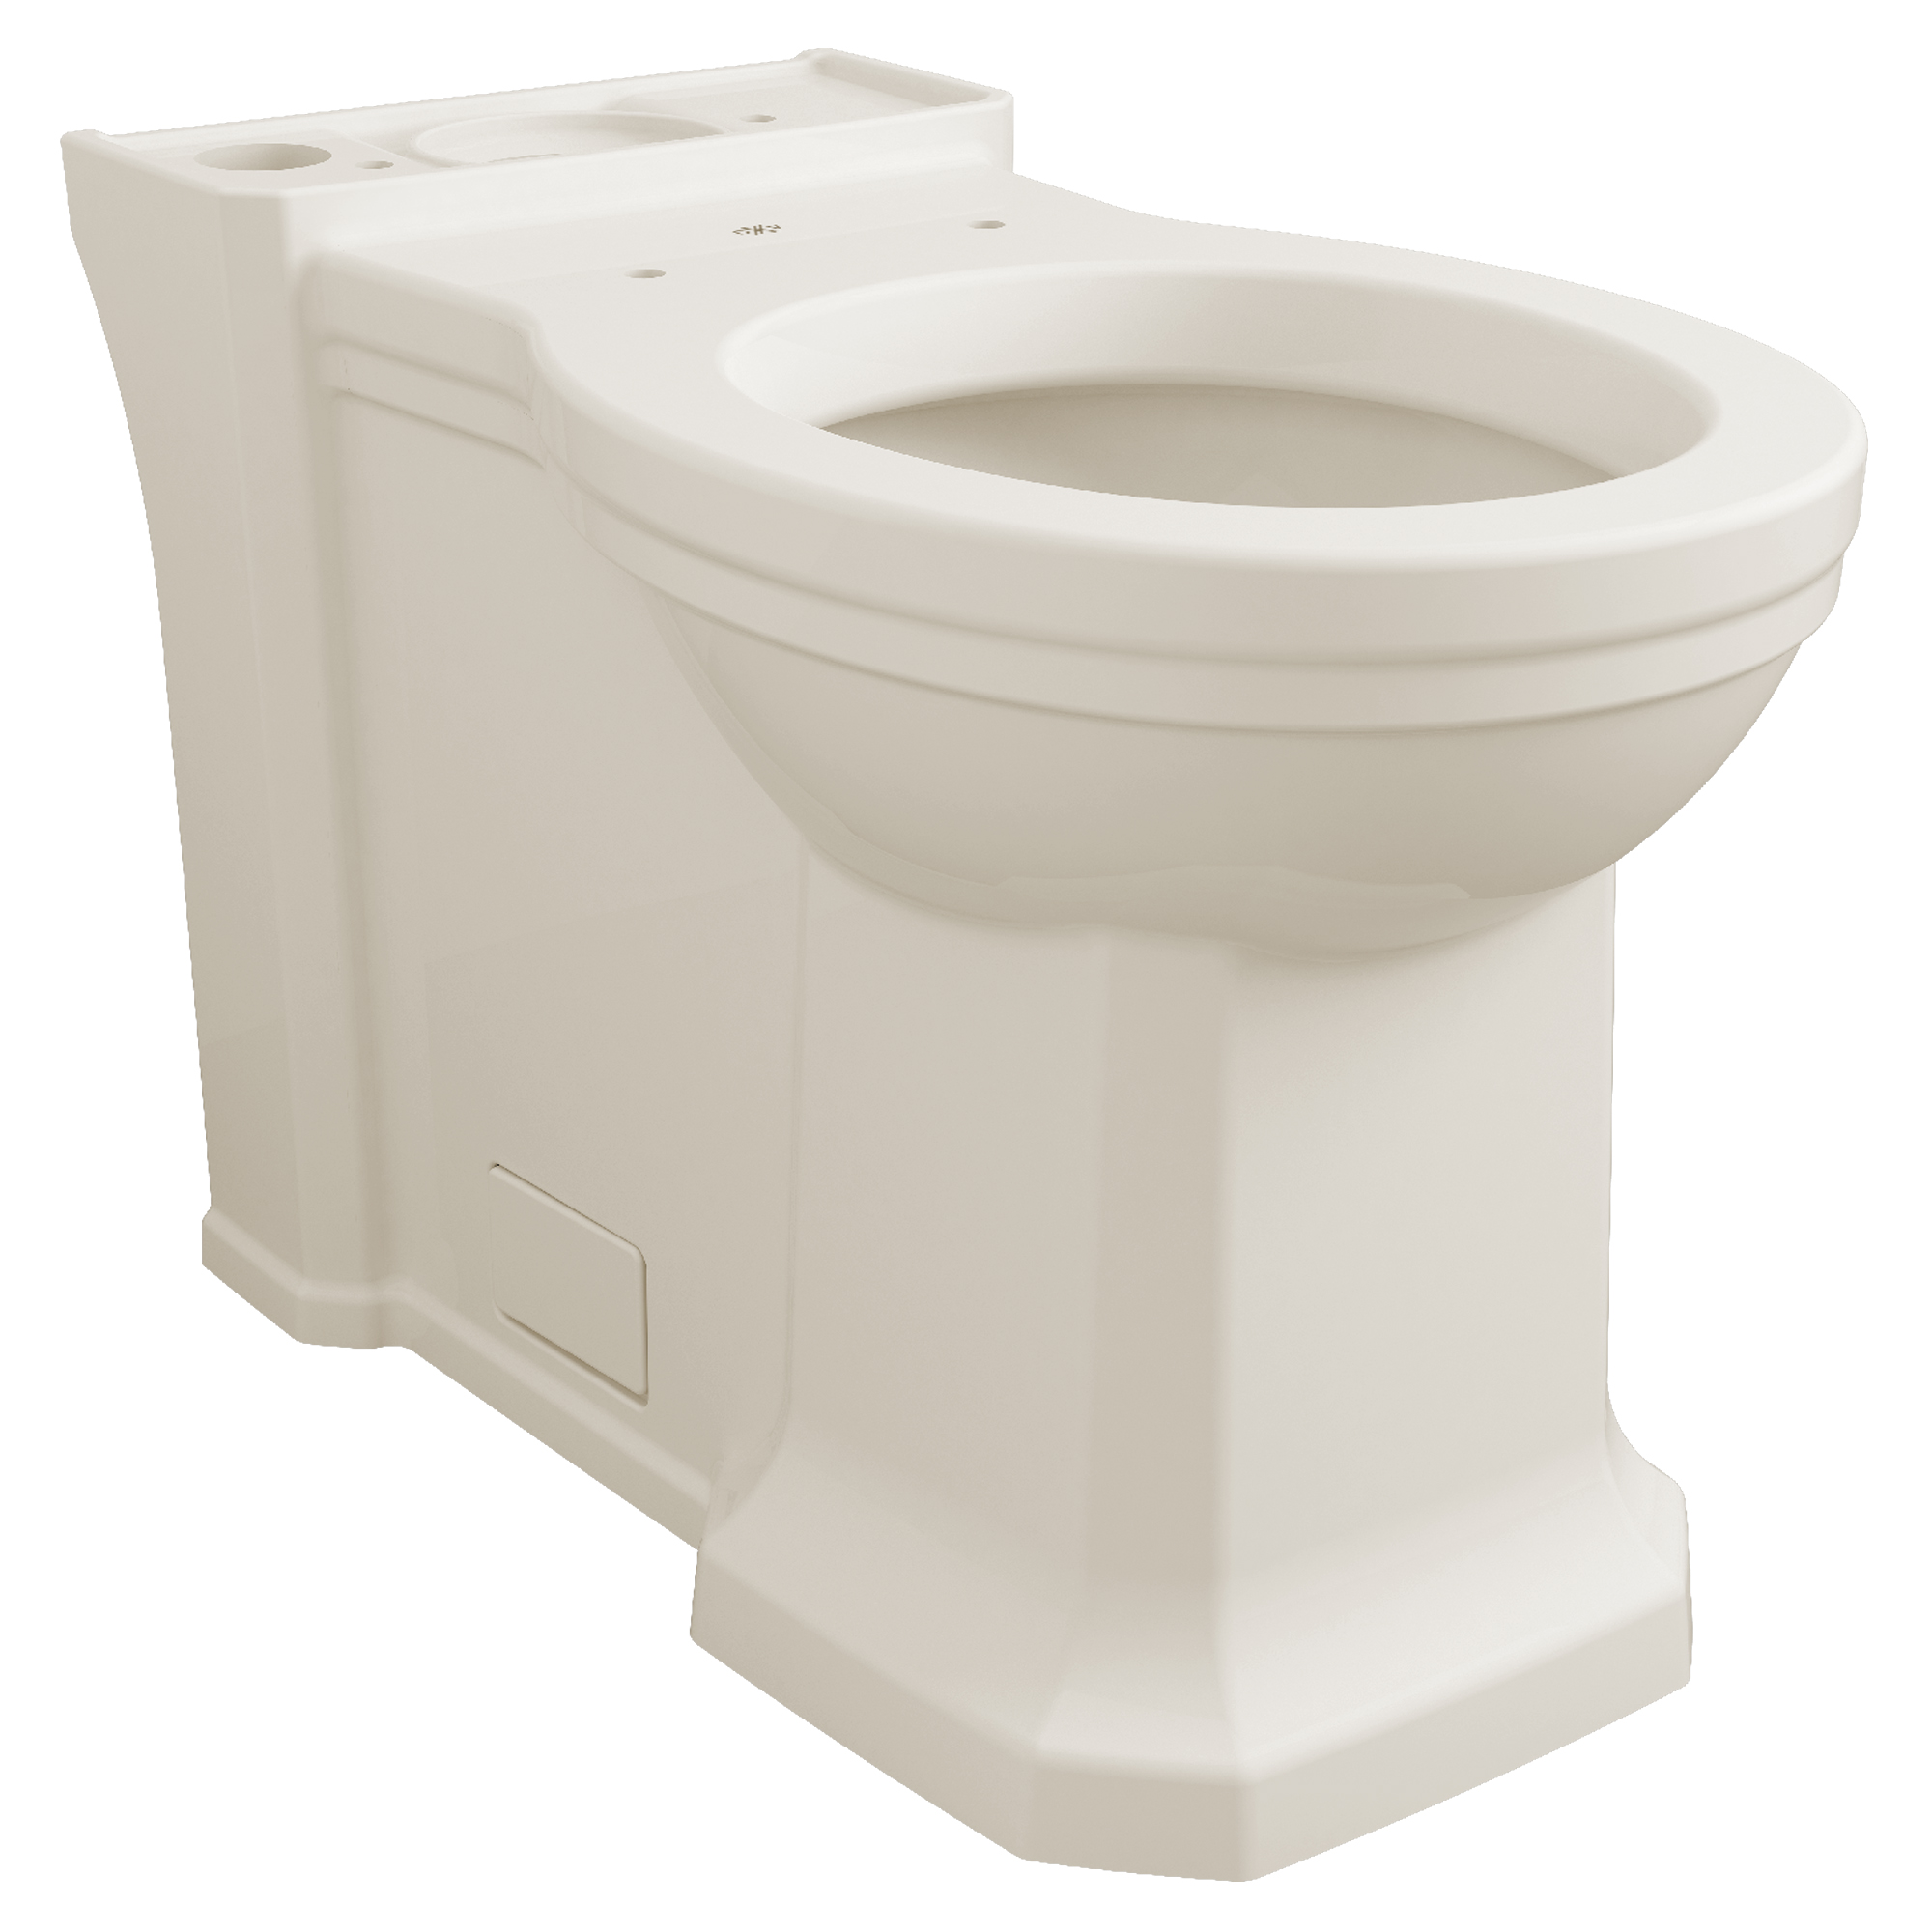 Fitzgerald™ Chair Height Round Front Toilet Bowl with Seat